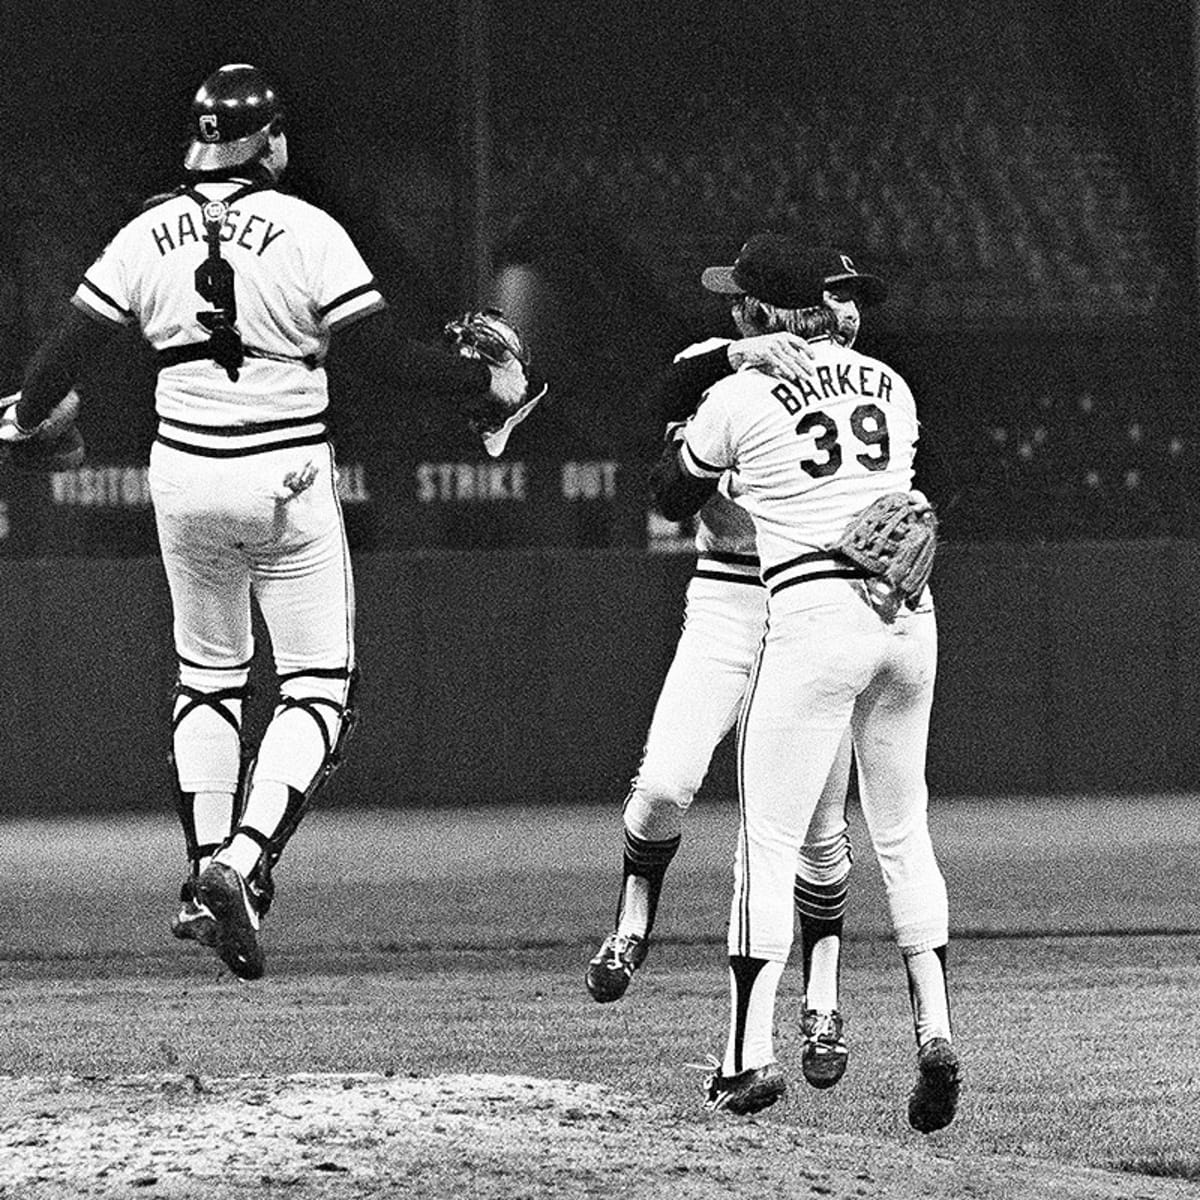 Len Barker perfect game: History in Cleveland in 1981 - Sports